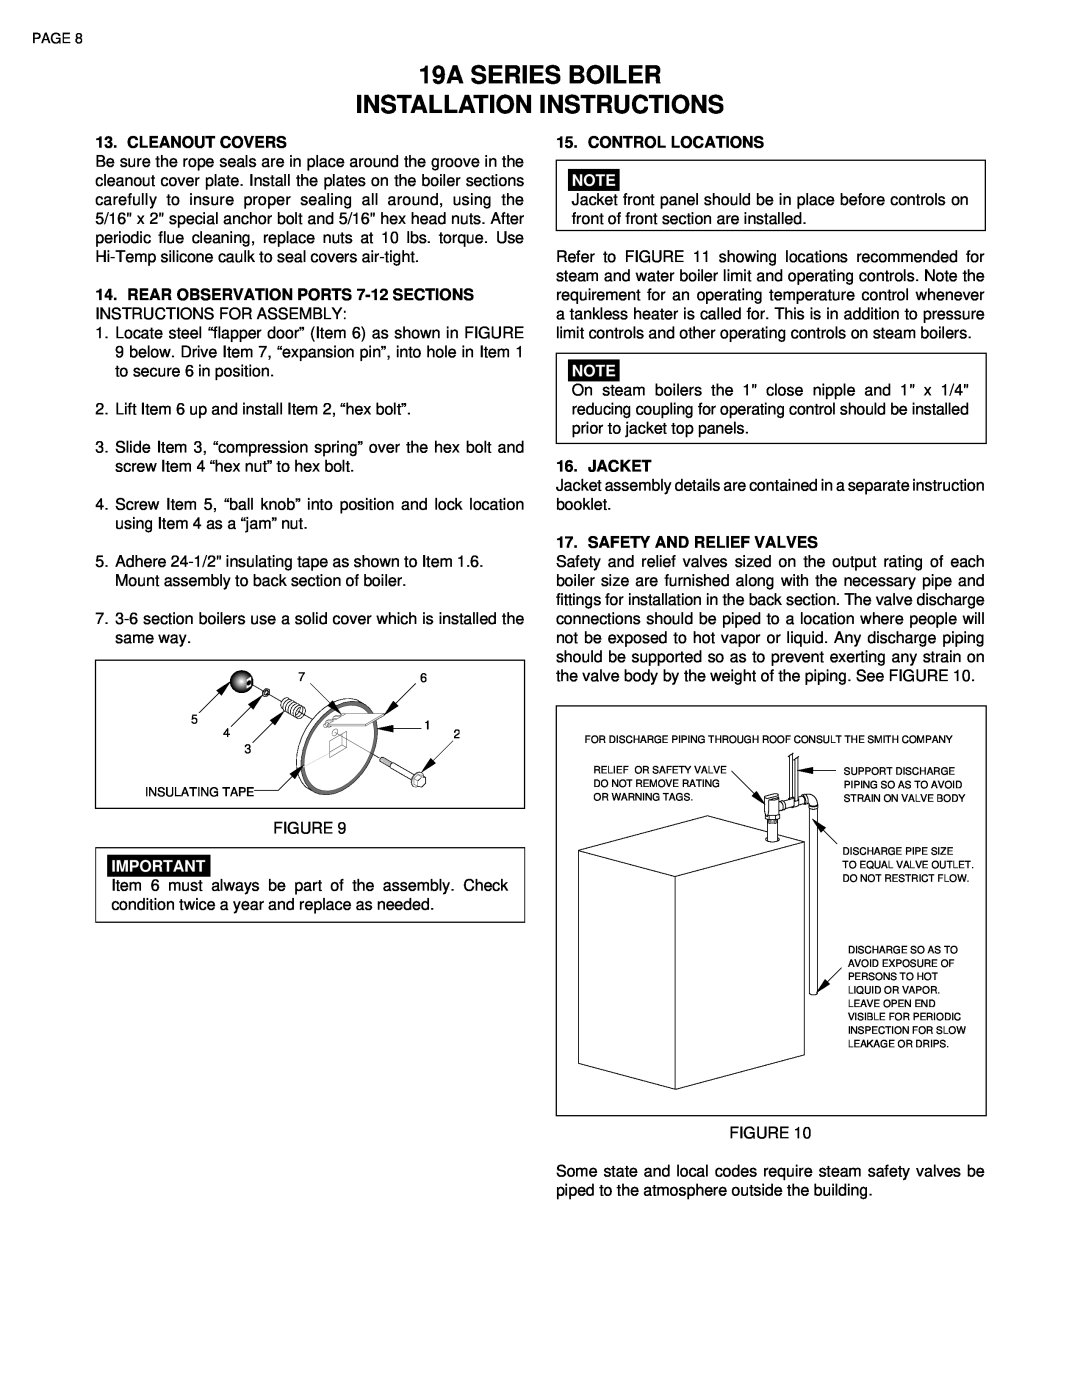 Smith Cast Iron Boilers 19A SERIES BOILER INSTALLATION INSTRUCTIONS, Cleanout Covers, Control Locations, Jacket 